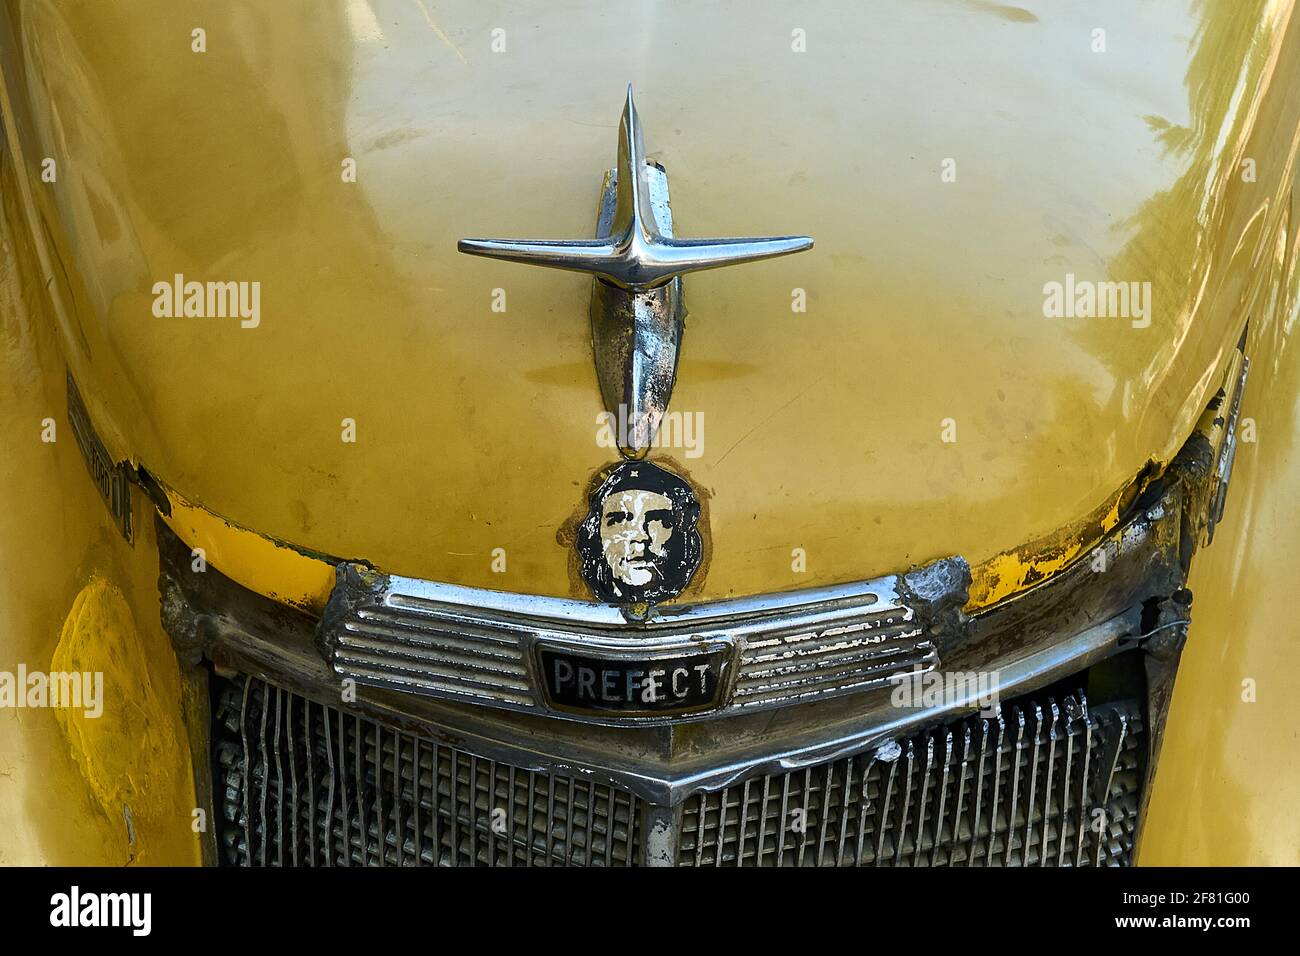 A Che Guevara car sticker placed under the silver hood ornament of a rusty old yellow Ford Prefect in Trinidad, Cuba Stock Photo